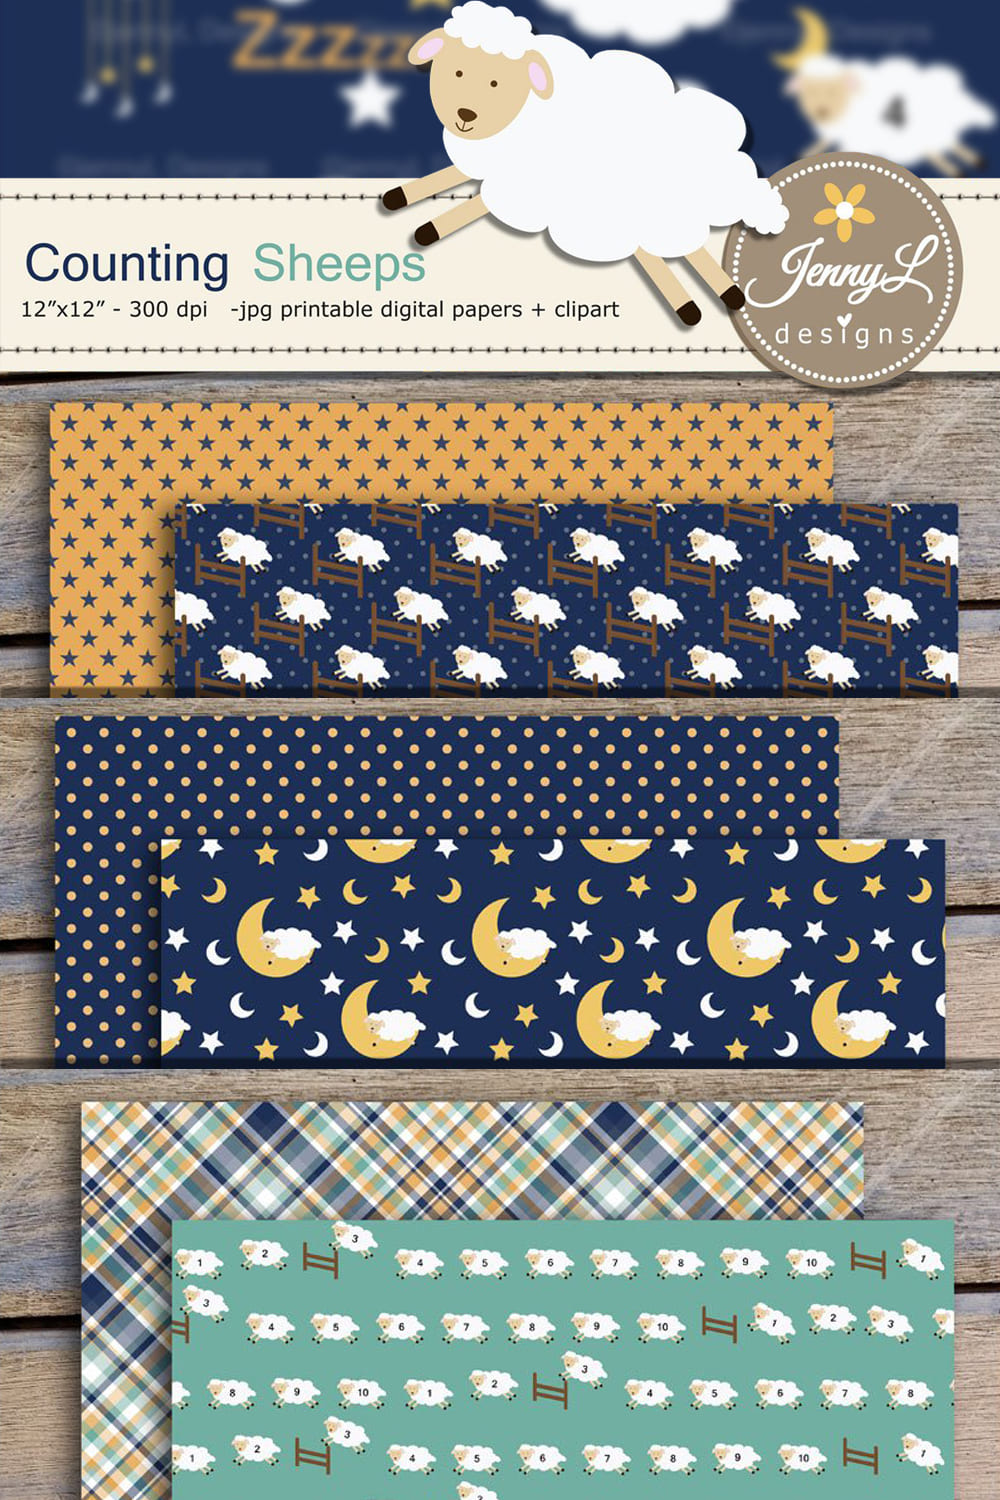 sheep digital papers clipart pinterest 1000 1500